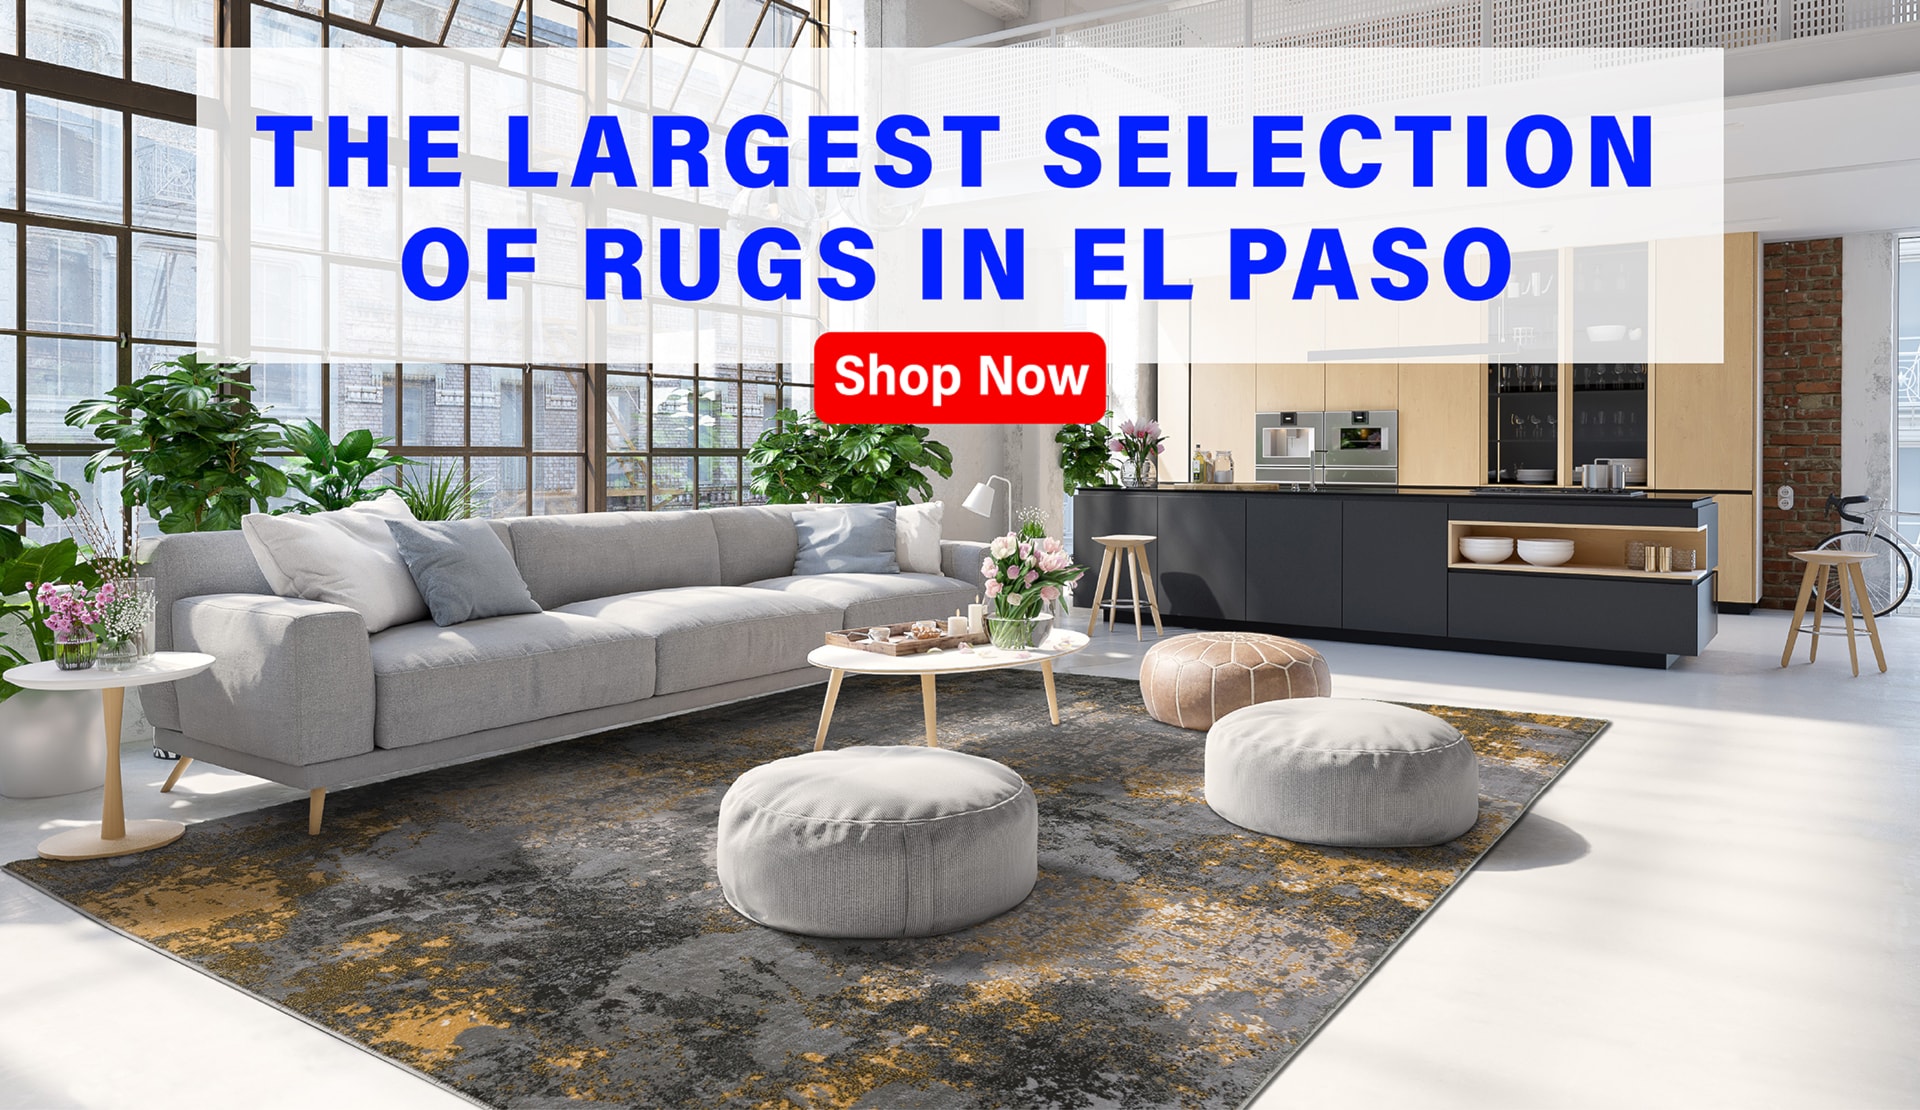 The Largest Selection of Rugs in El Paso